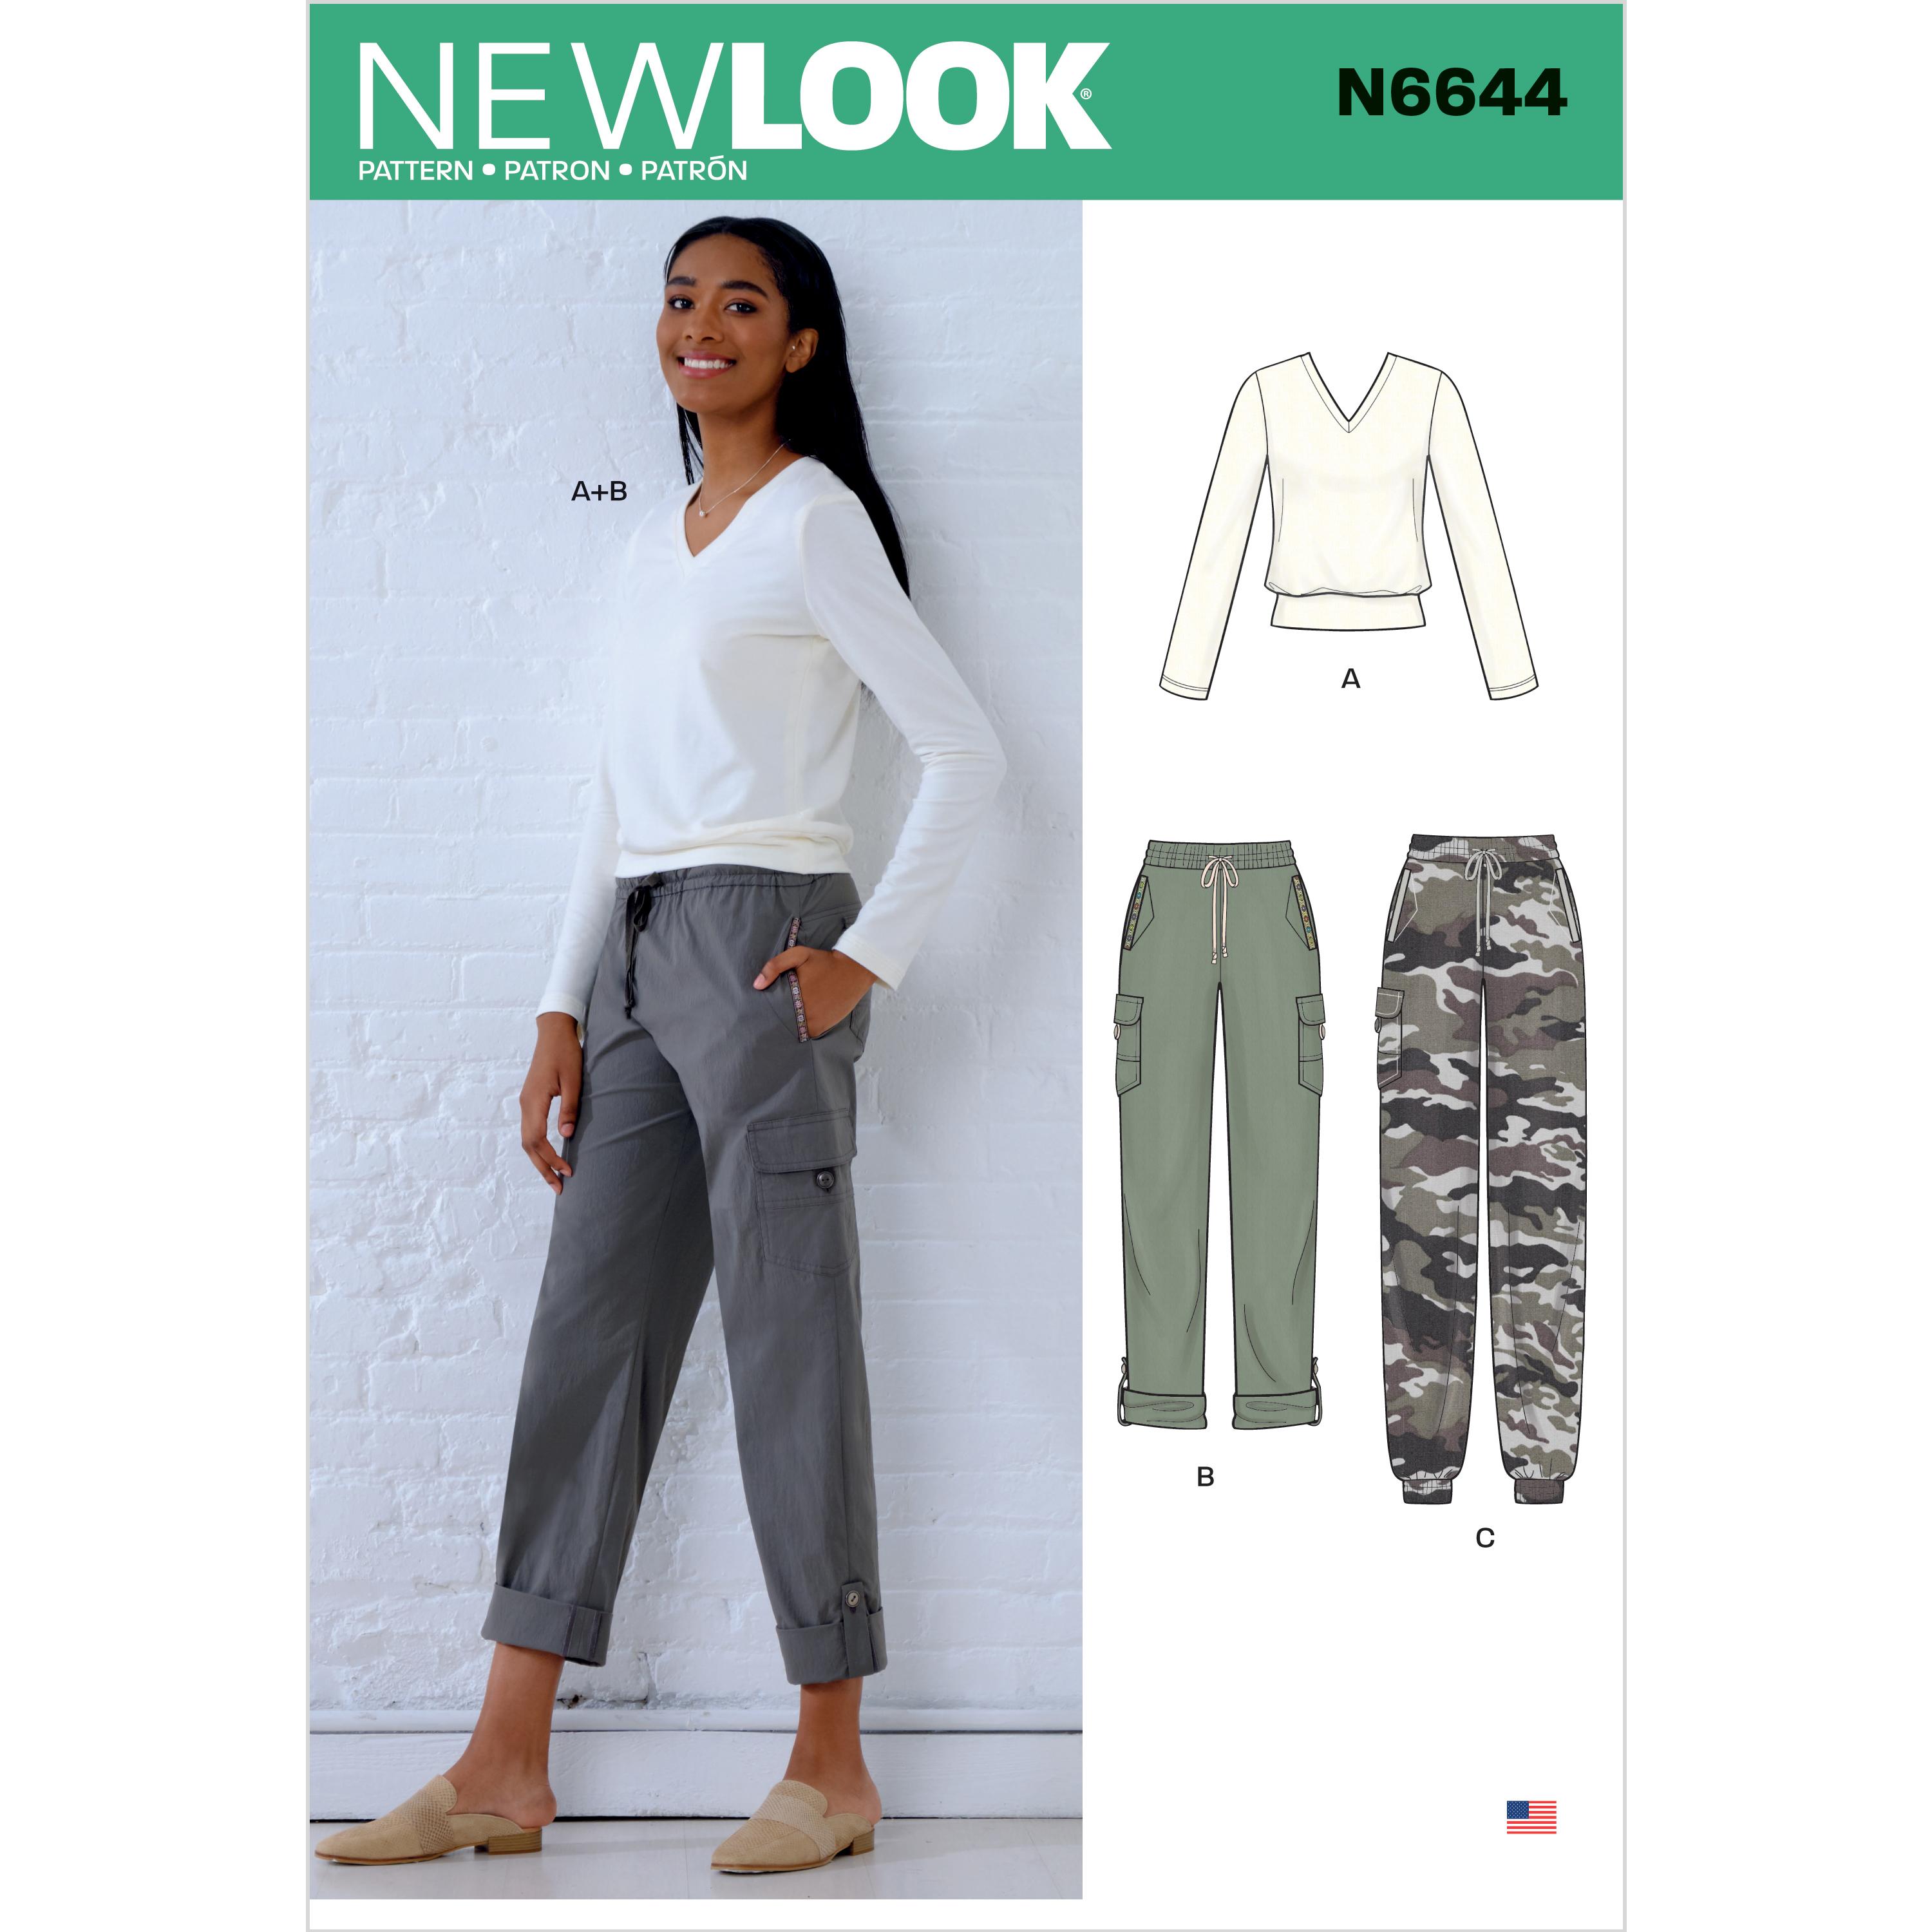 New Look Sewing Pattern N6644 Misses' Cargo Pants and Knit Top